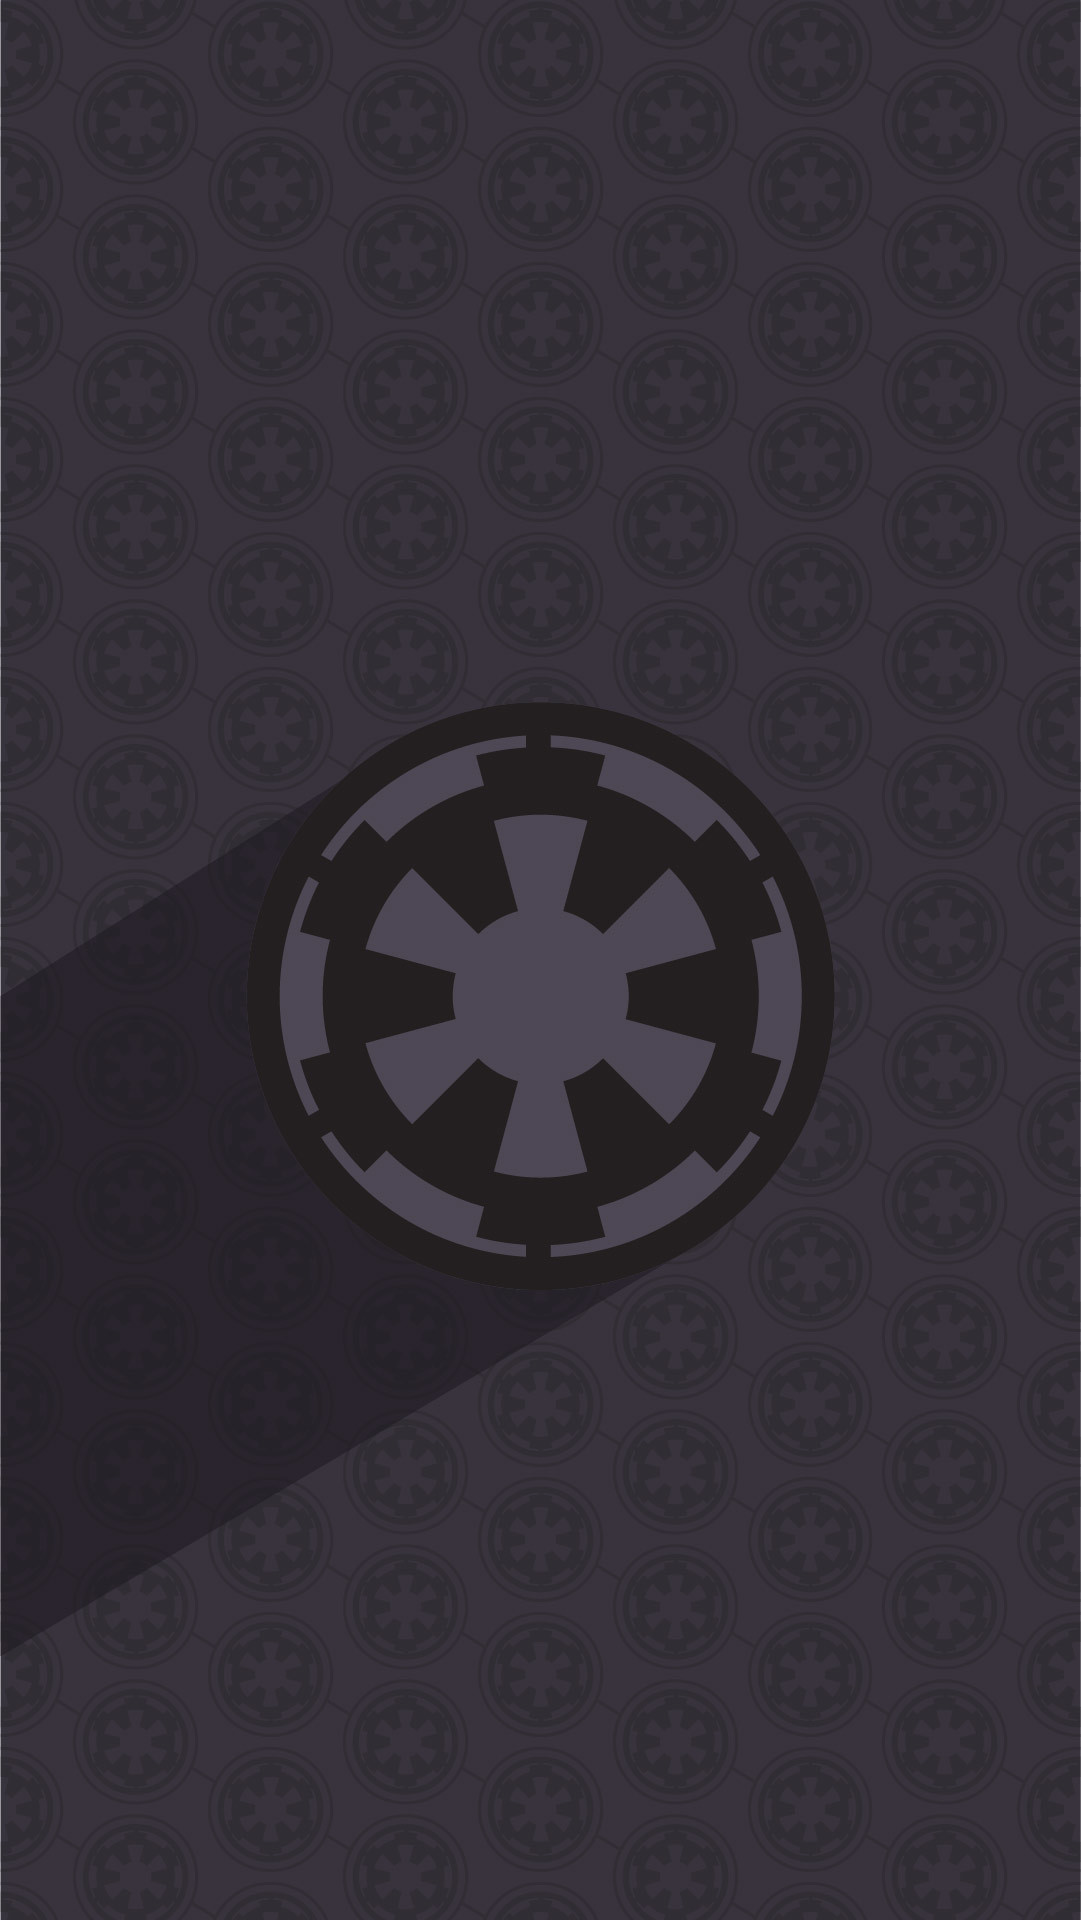 1081x1920 May the wallpapers be with you. StarWars.com.